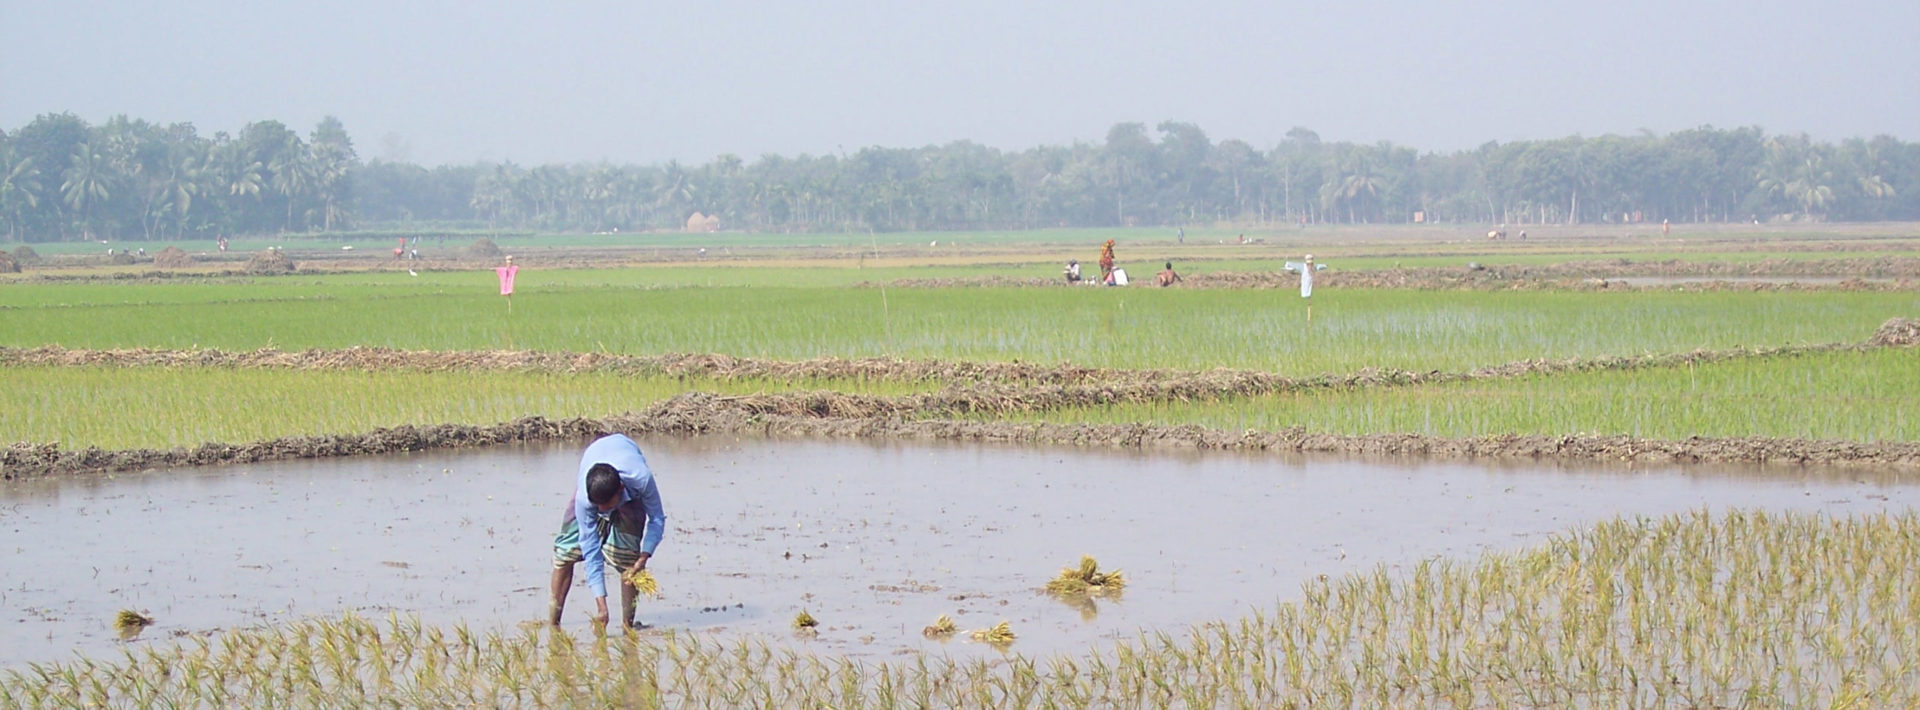 Research from Professor Charles Harvey shows arsenic in groundwater damages rice yield in Bangladesh